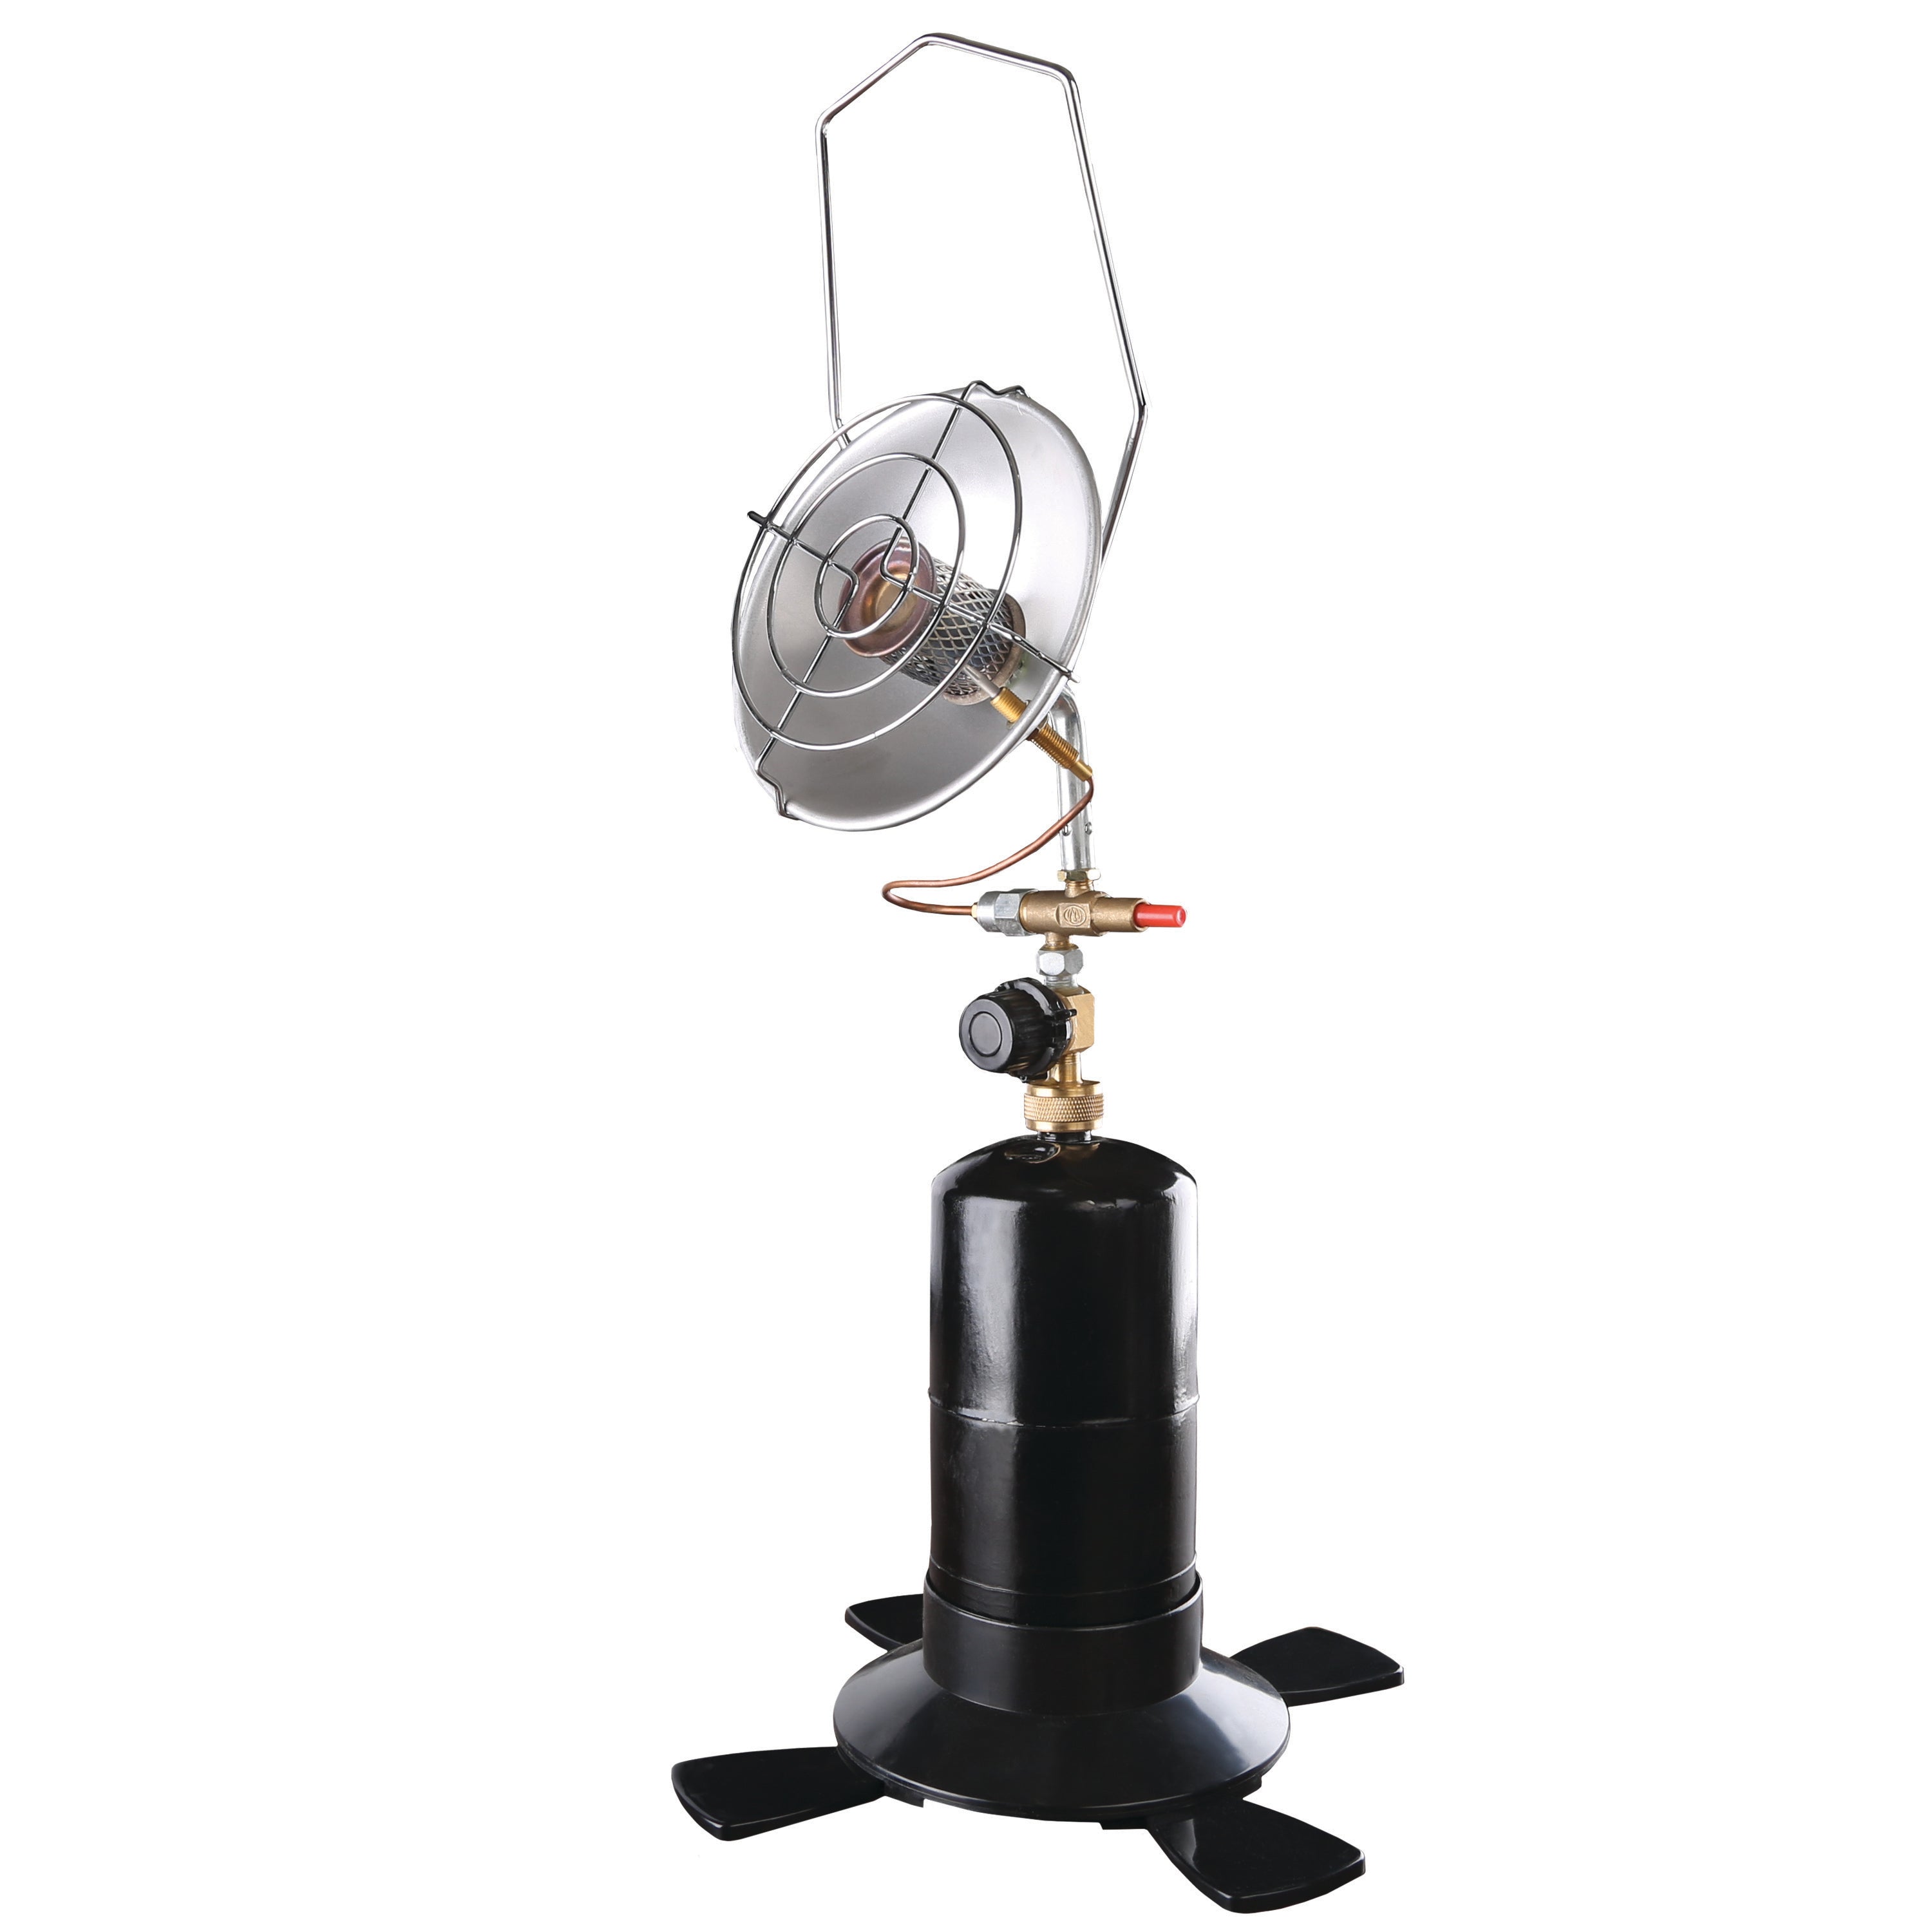 Portable Outdoor Propane Infrared Radiant Heater